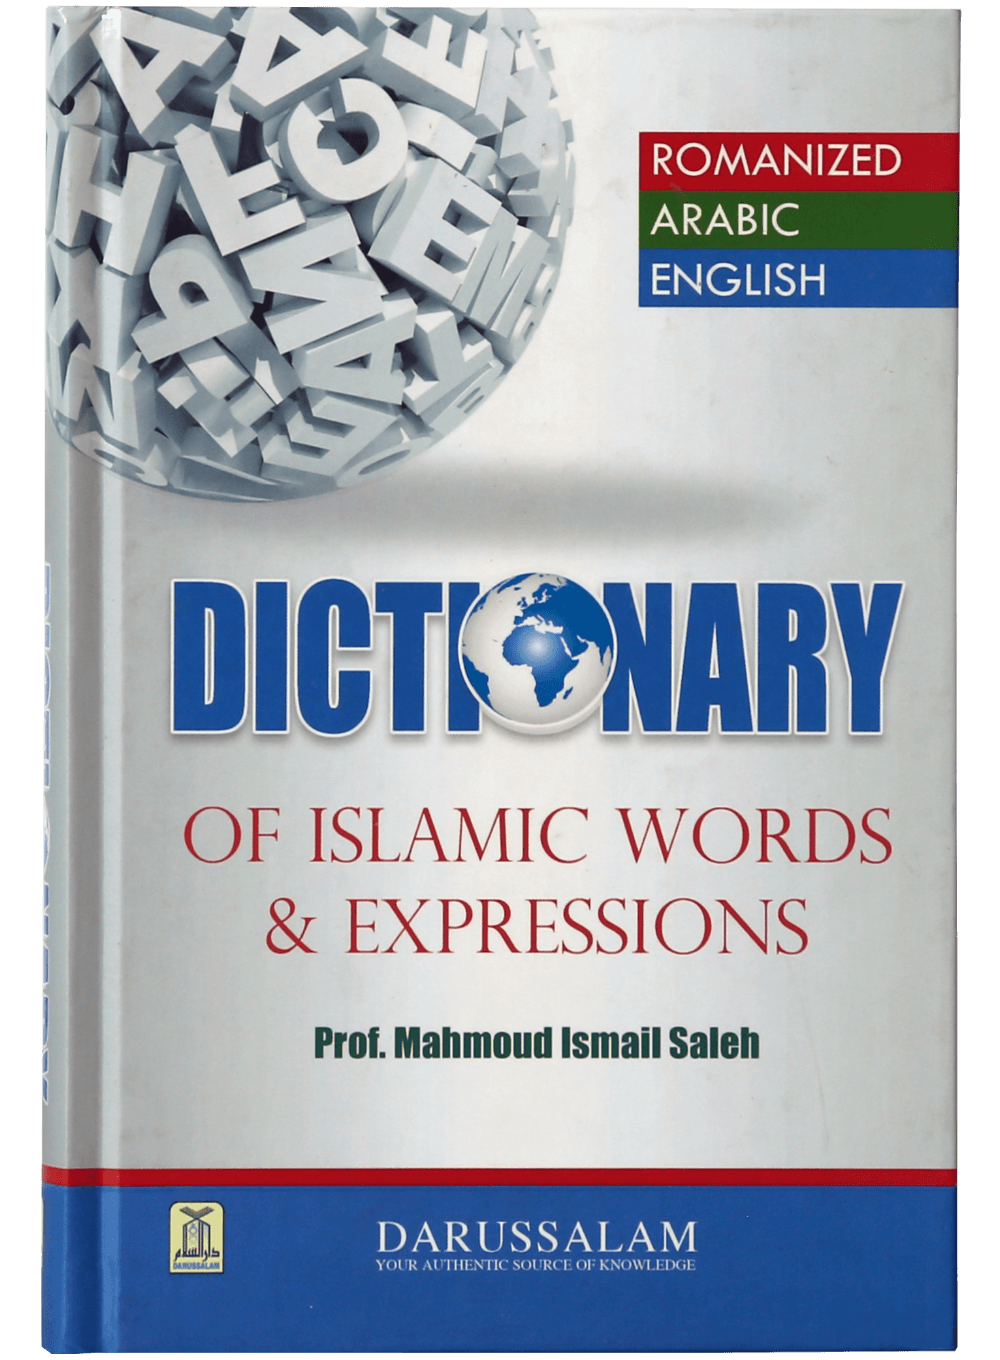 darussalam-2017-10-03-12-02-02dictionary-of-islamic-words-and-expressions-(1)